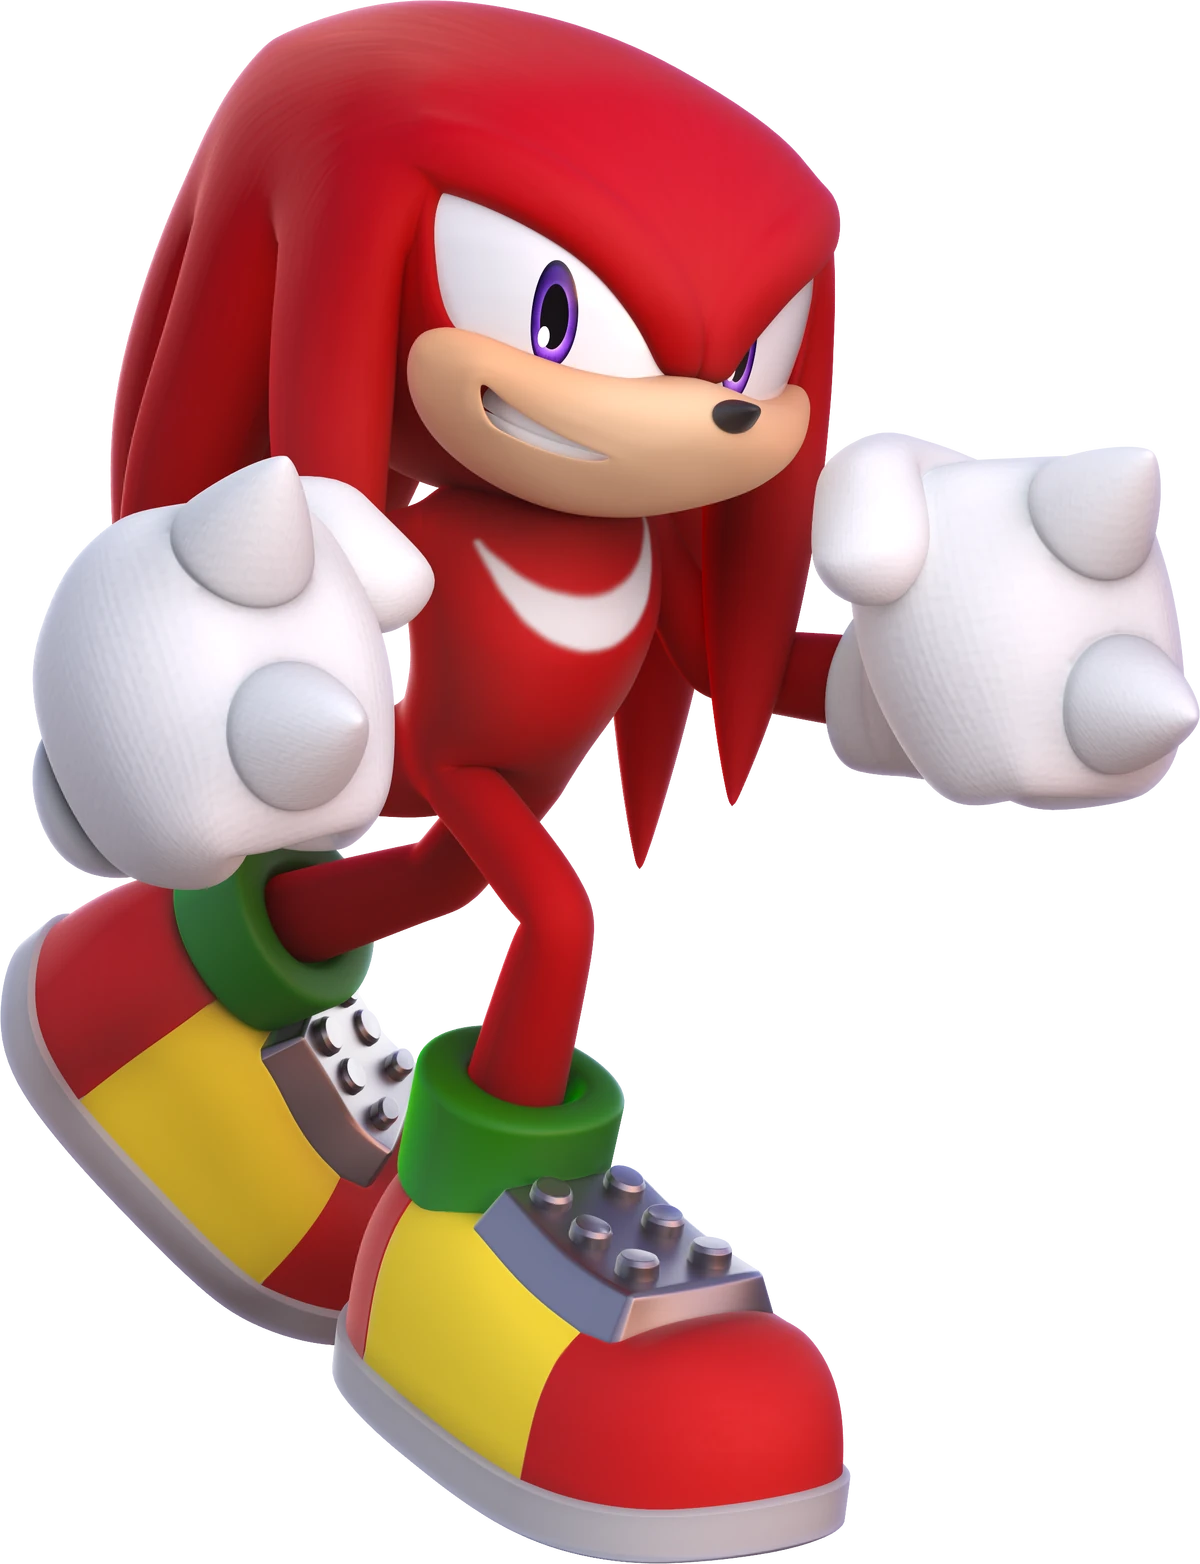 Knuckles the Echidna - Wikipedia